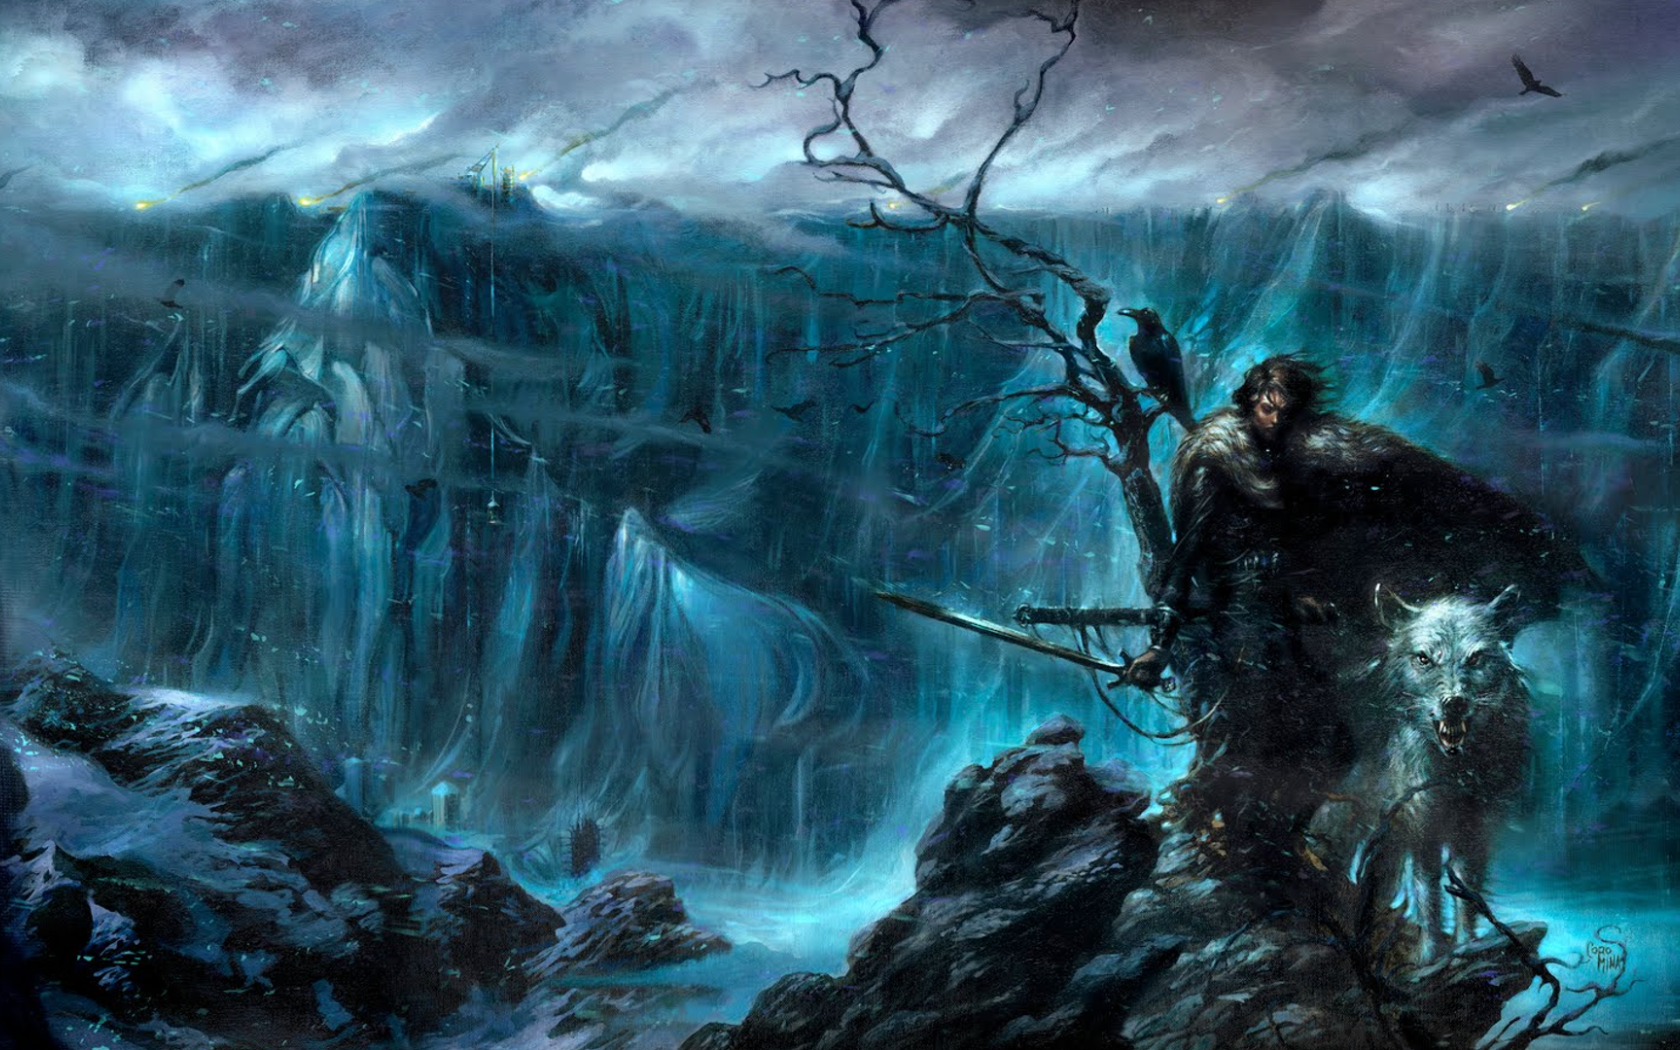 Art for the series Game of Thrones